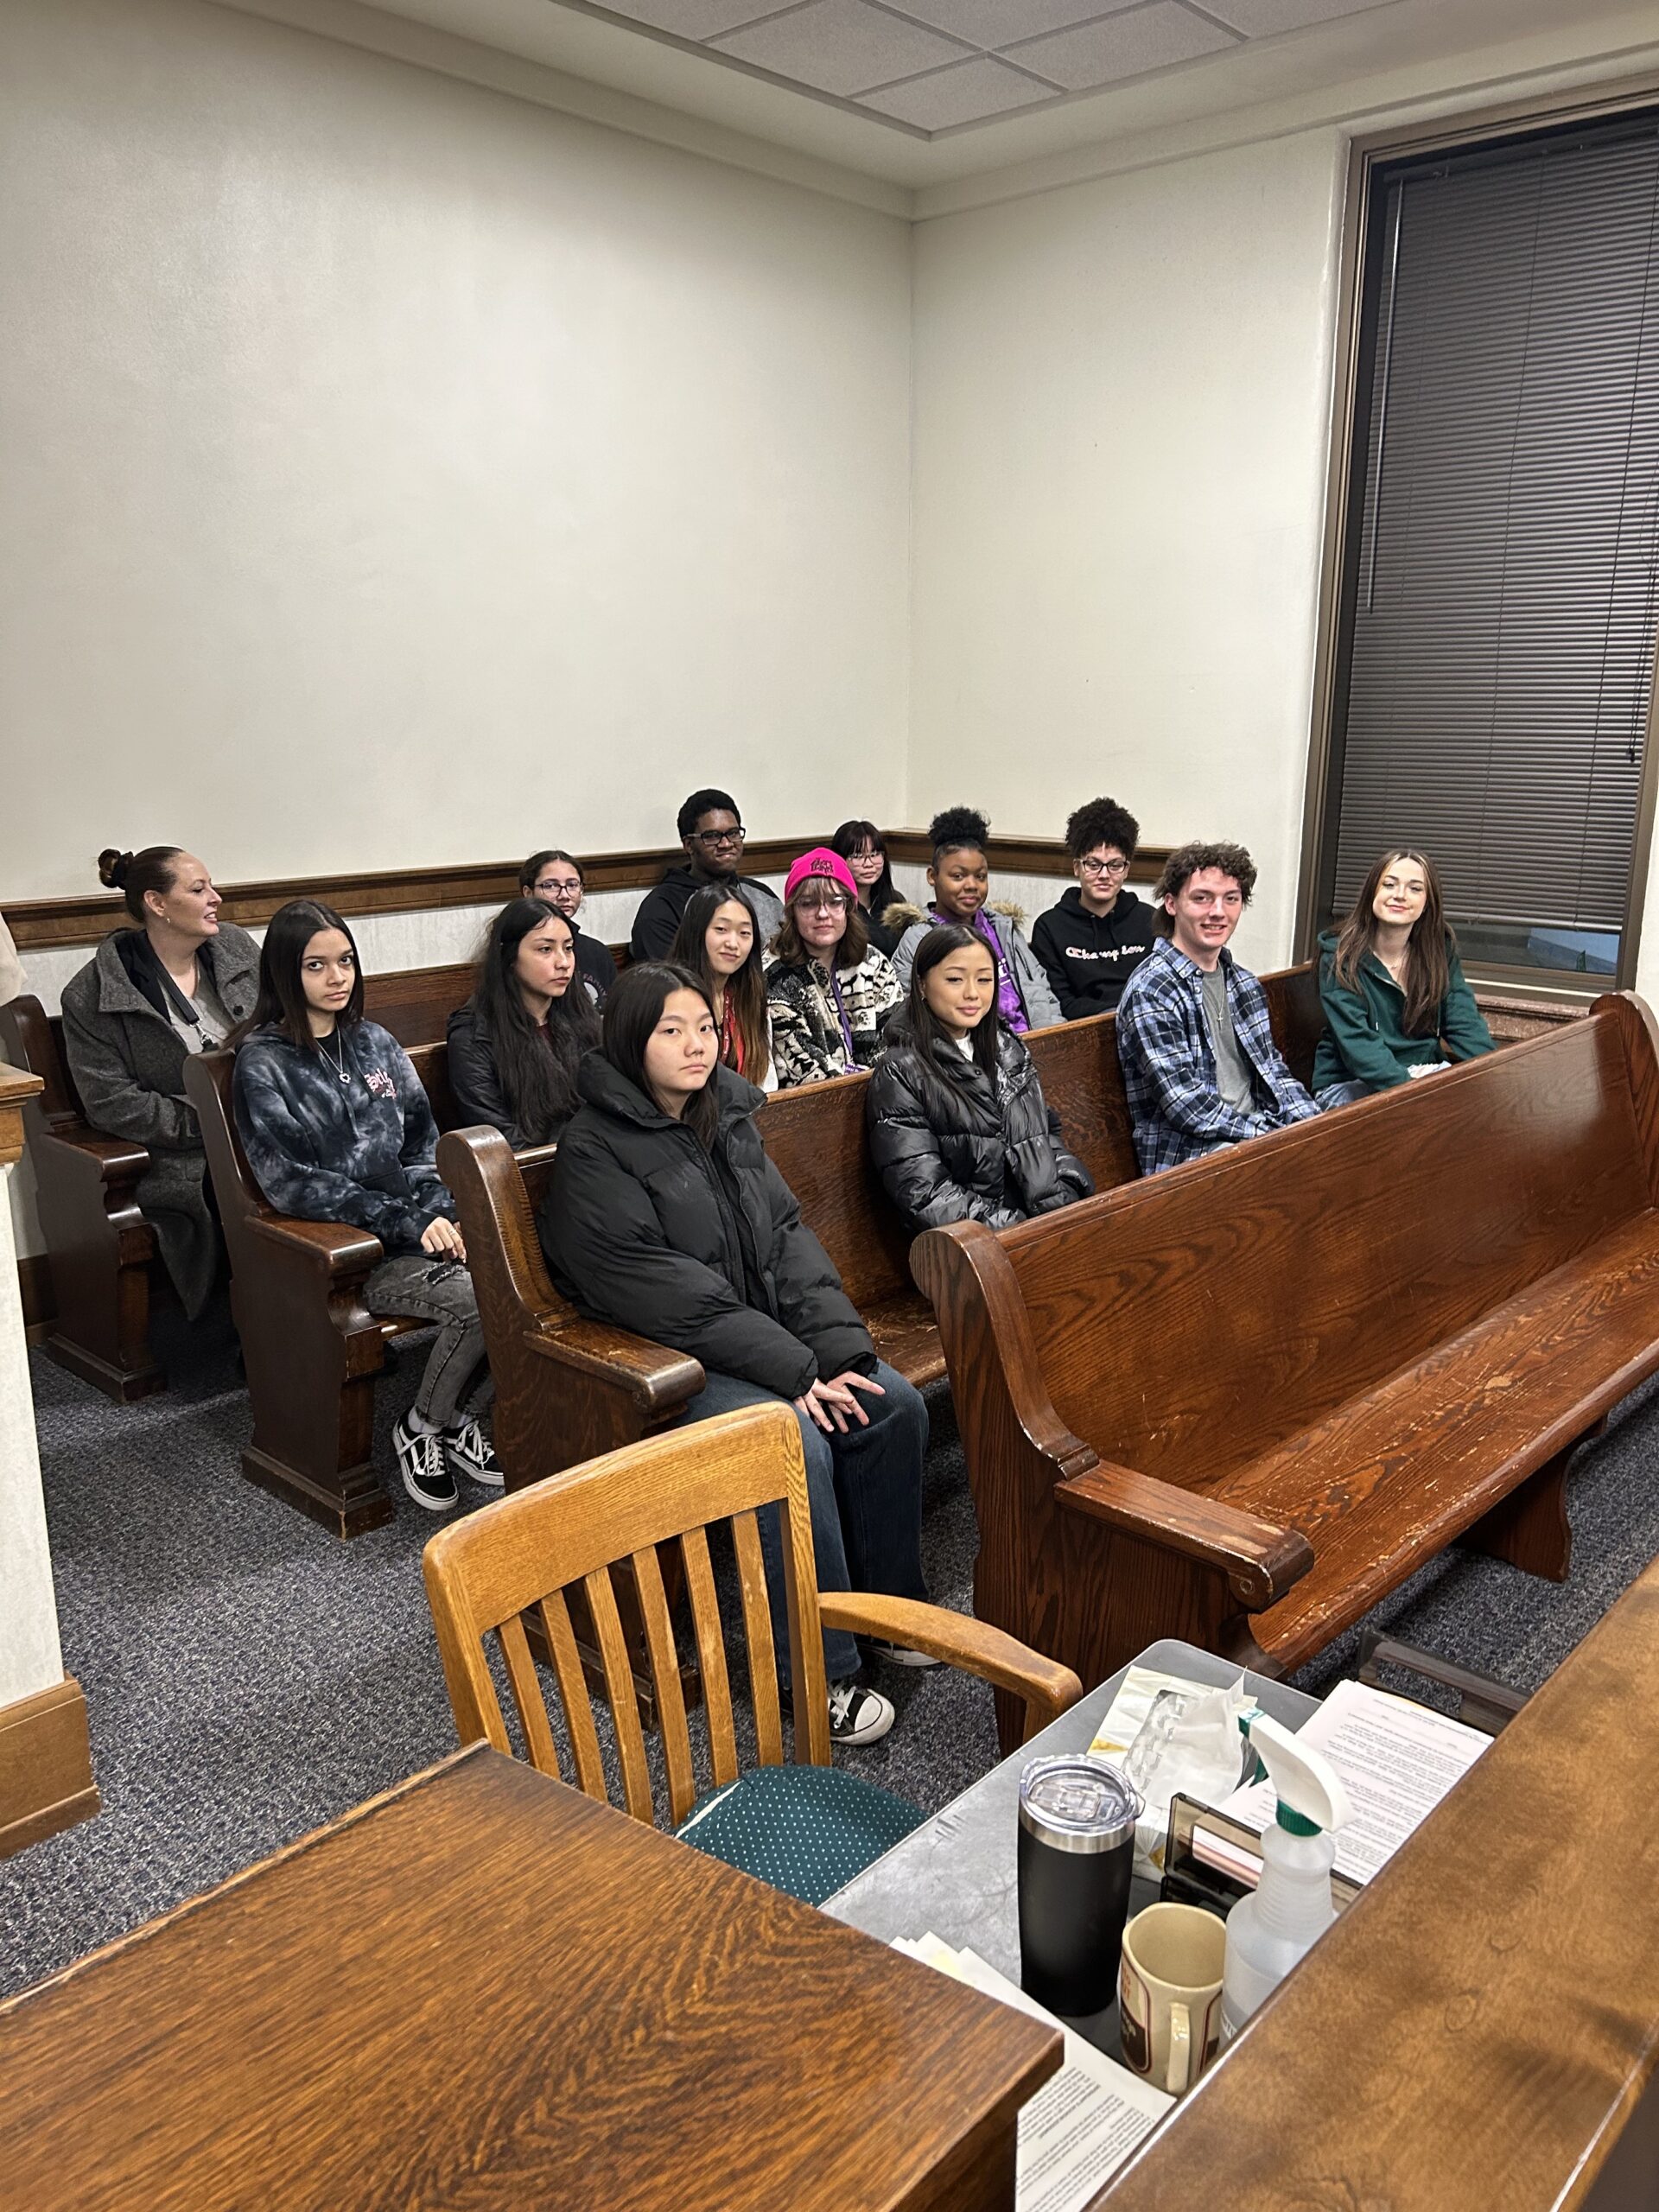 Green Bay West students in a courtroom in the Brown County Courthouse.